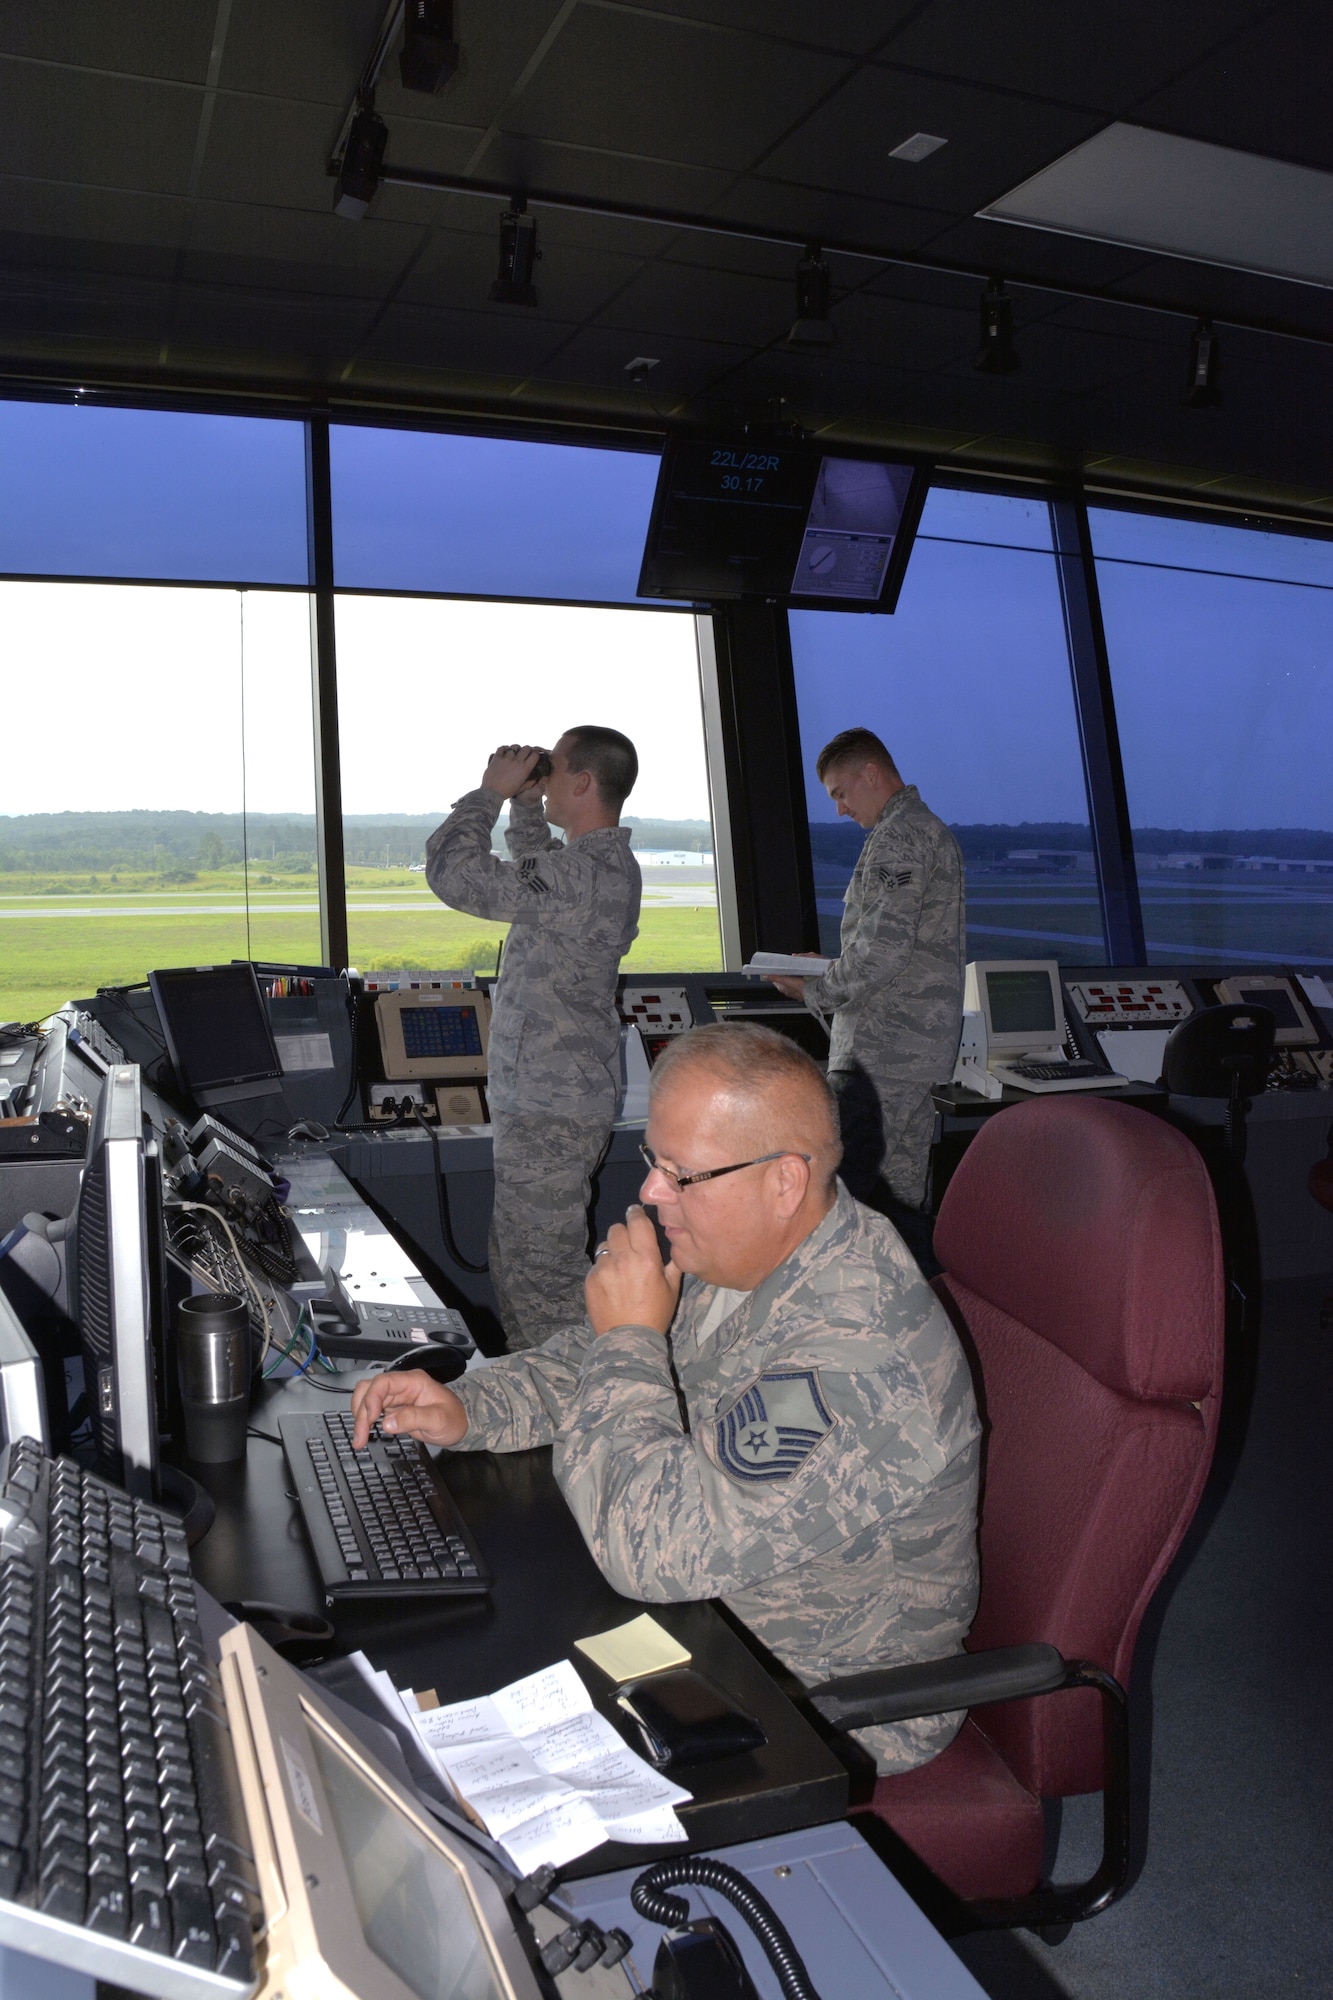 U.S. Air Force Master Sgt. Tony L. Parker, tower watch supervisor for the 235th Air Traffic Control Squadron issues a Notice to Airmen (NOTAM) with Lockheed Martin Flight Services for C-130 aircraft night operations training as Staff Sgt. Justin W. Condon, a local controller for airborne aircraft looks for aircraft arriving from the east. Senior Airman James D. Bellissimo, ground controller, consults regulations for a precision approach radar alignment during daily operations, July 8, 2015 at Stanly County Airport, New London, N.C. (U.S. Air National Guard photo by Master Sgt. Patricia F. Moran, 145th Public Affairs/Released)